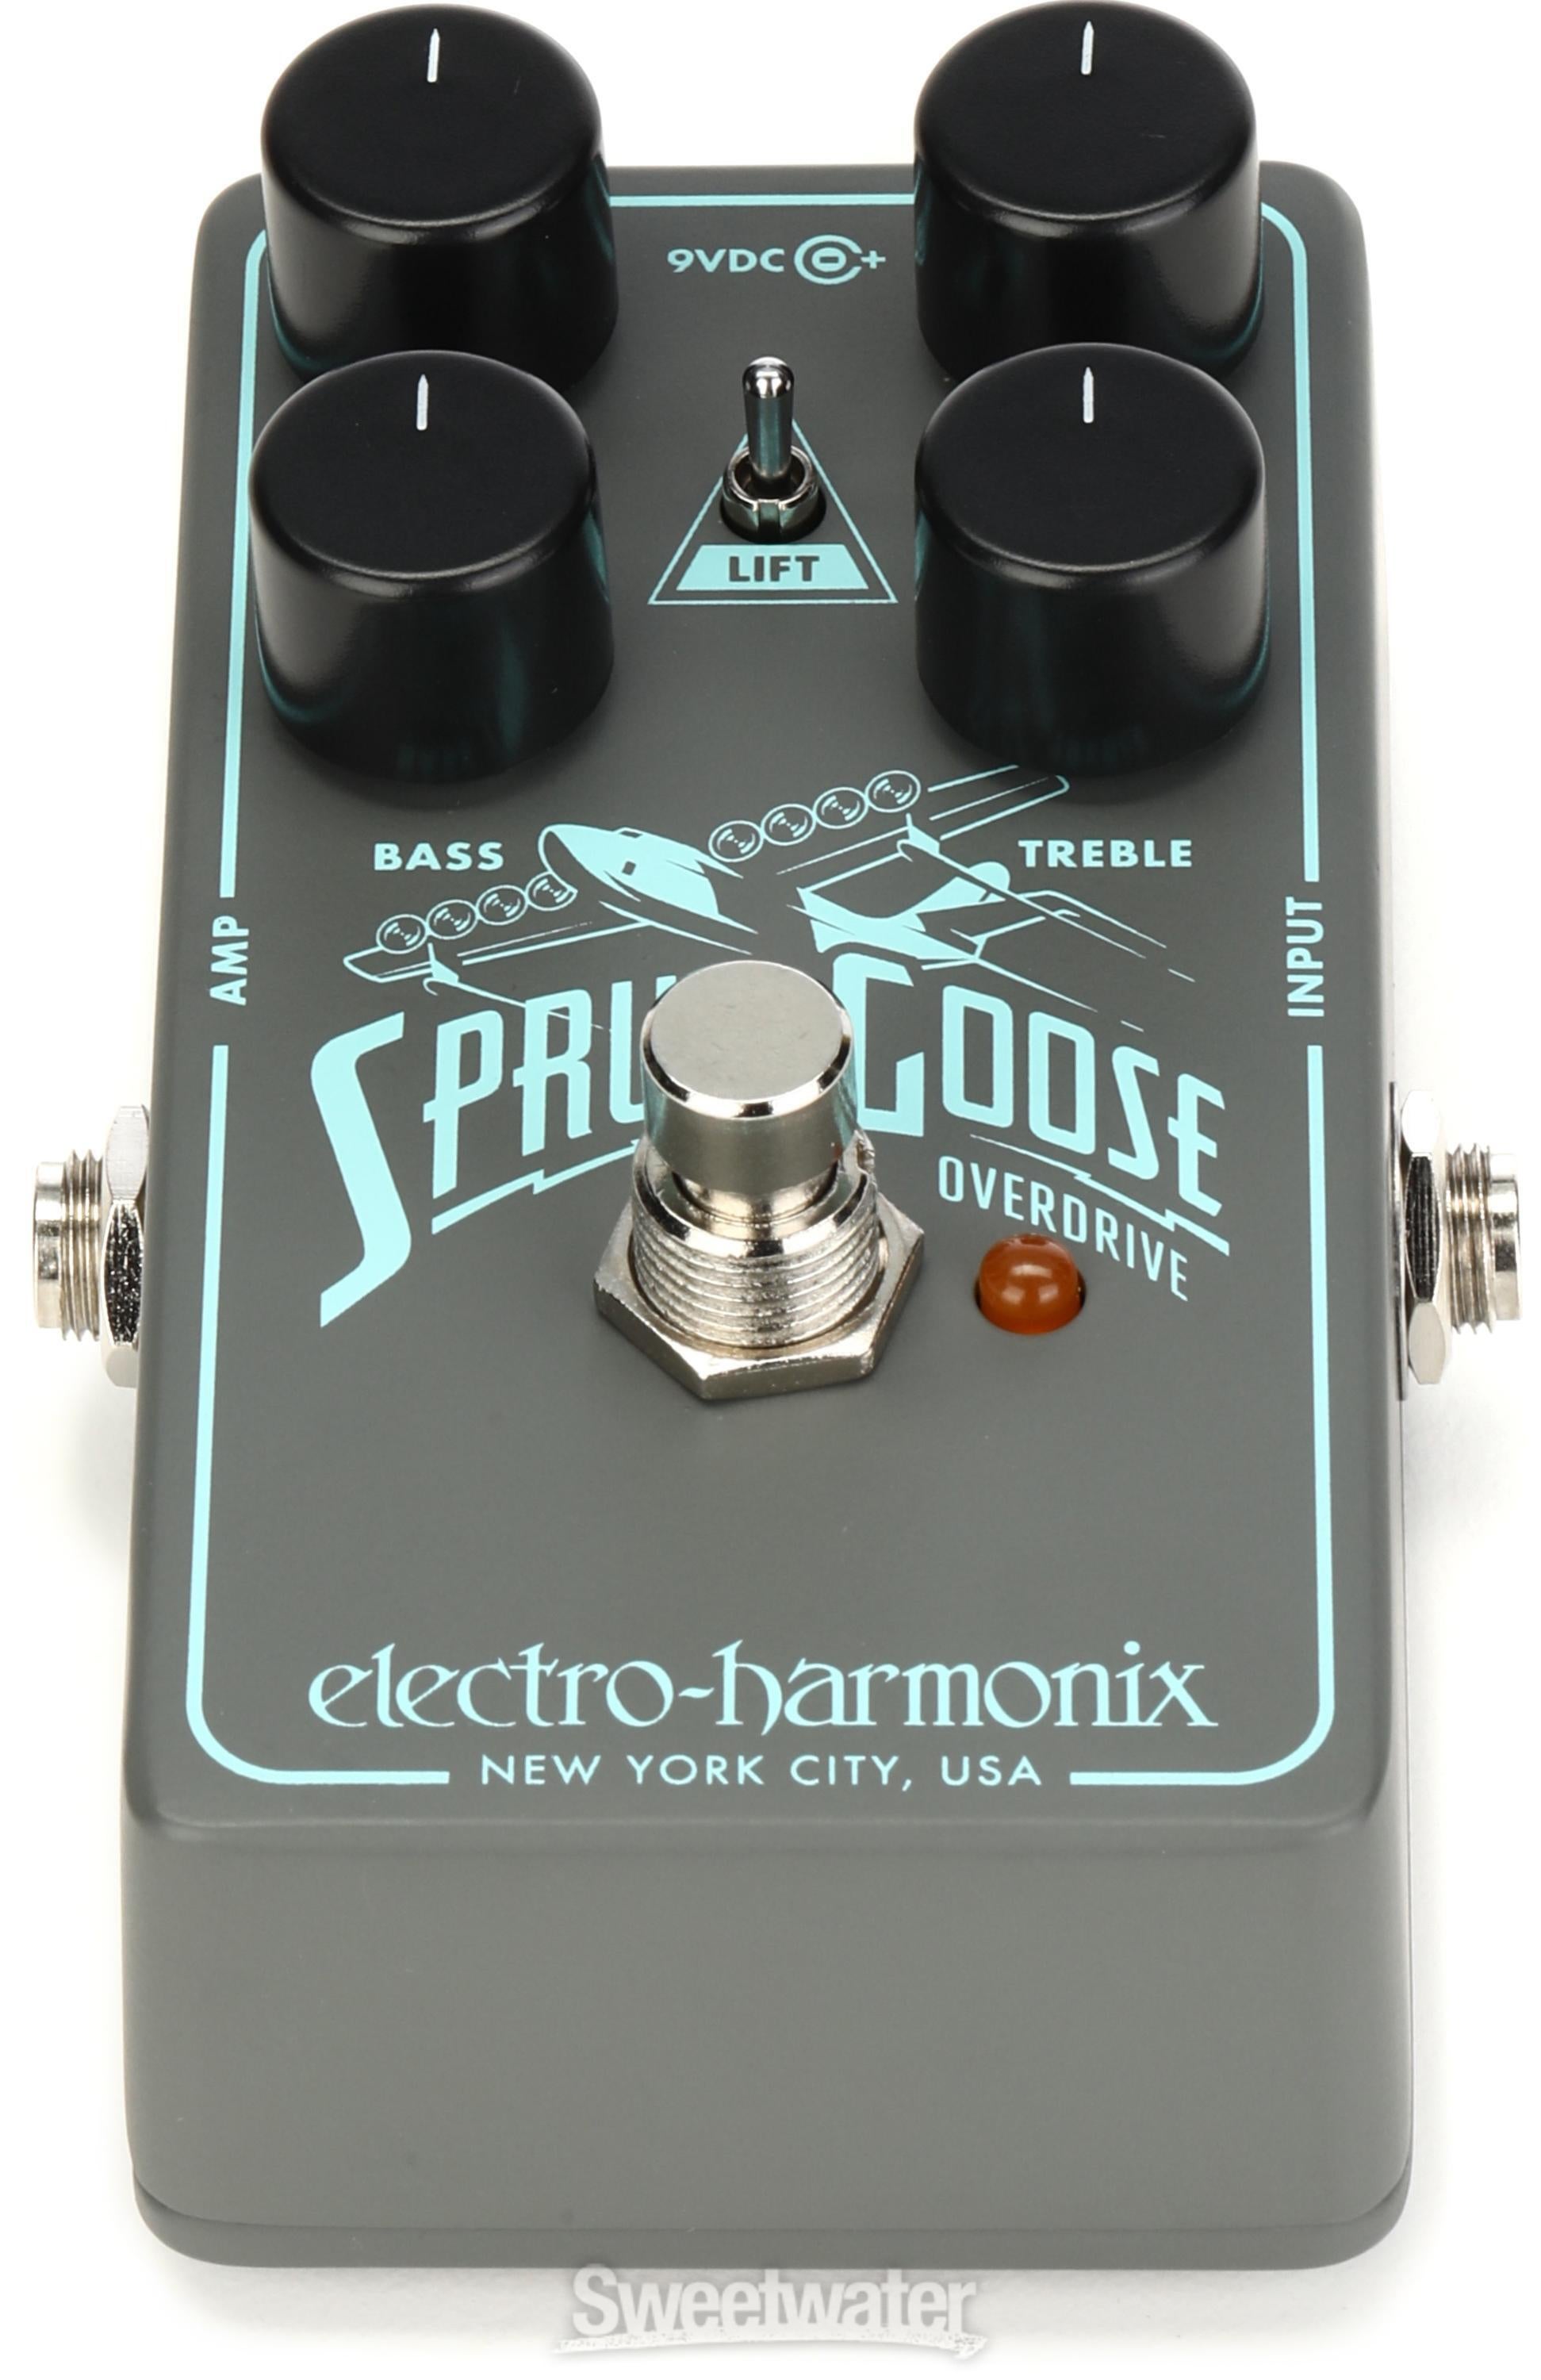 Electro-Harmonix Spruce Goose Overdrive Effects Pedal | Sweetwater